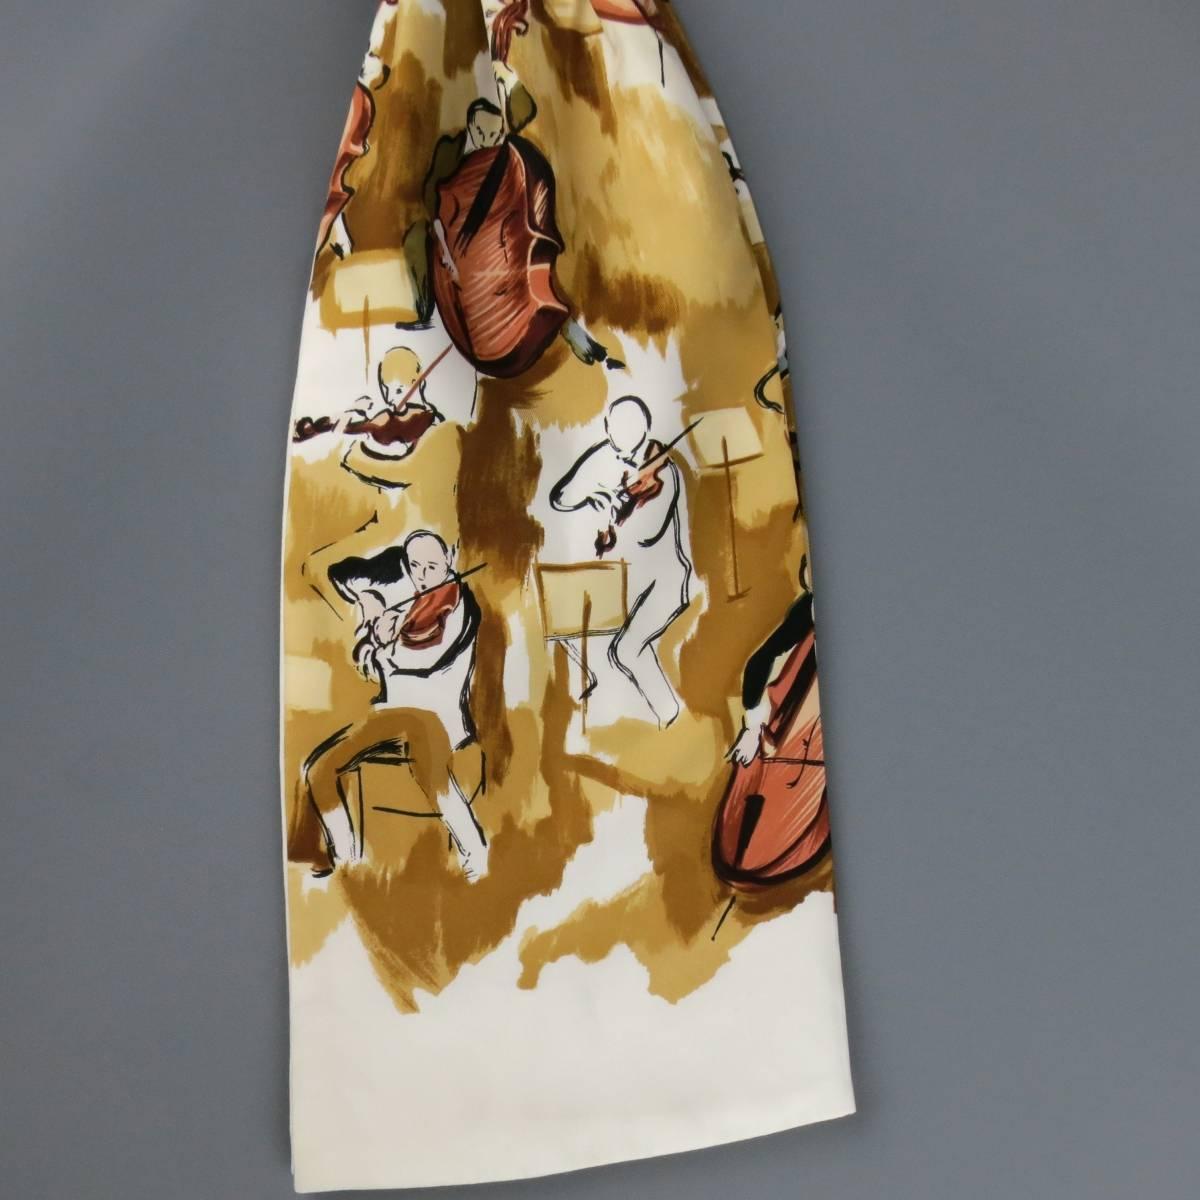 Vintage HERMES silk ascot features a white background with varying hues of brown in a 'concerto' print consisting of brush-stroked painted musicians by legendary Hermes artist Jean-Louis Clerc. Clerc's signature appears at the bottom of the print.